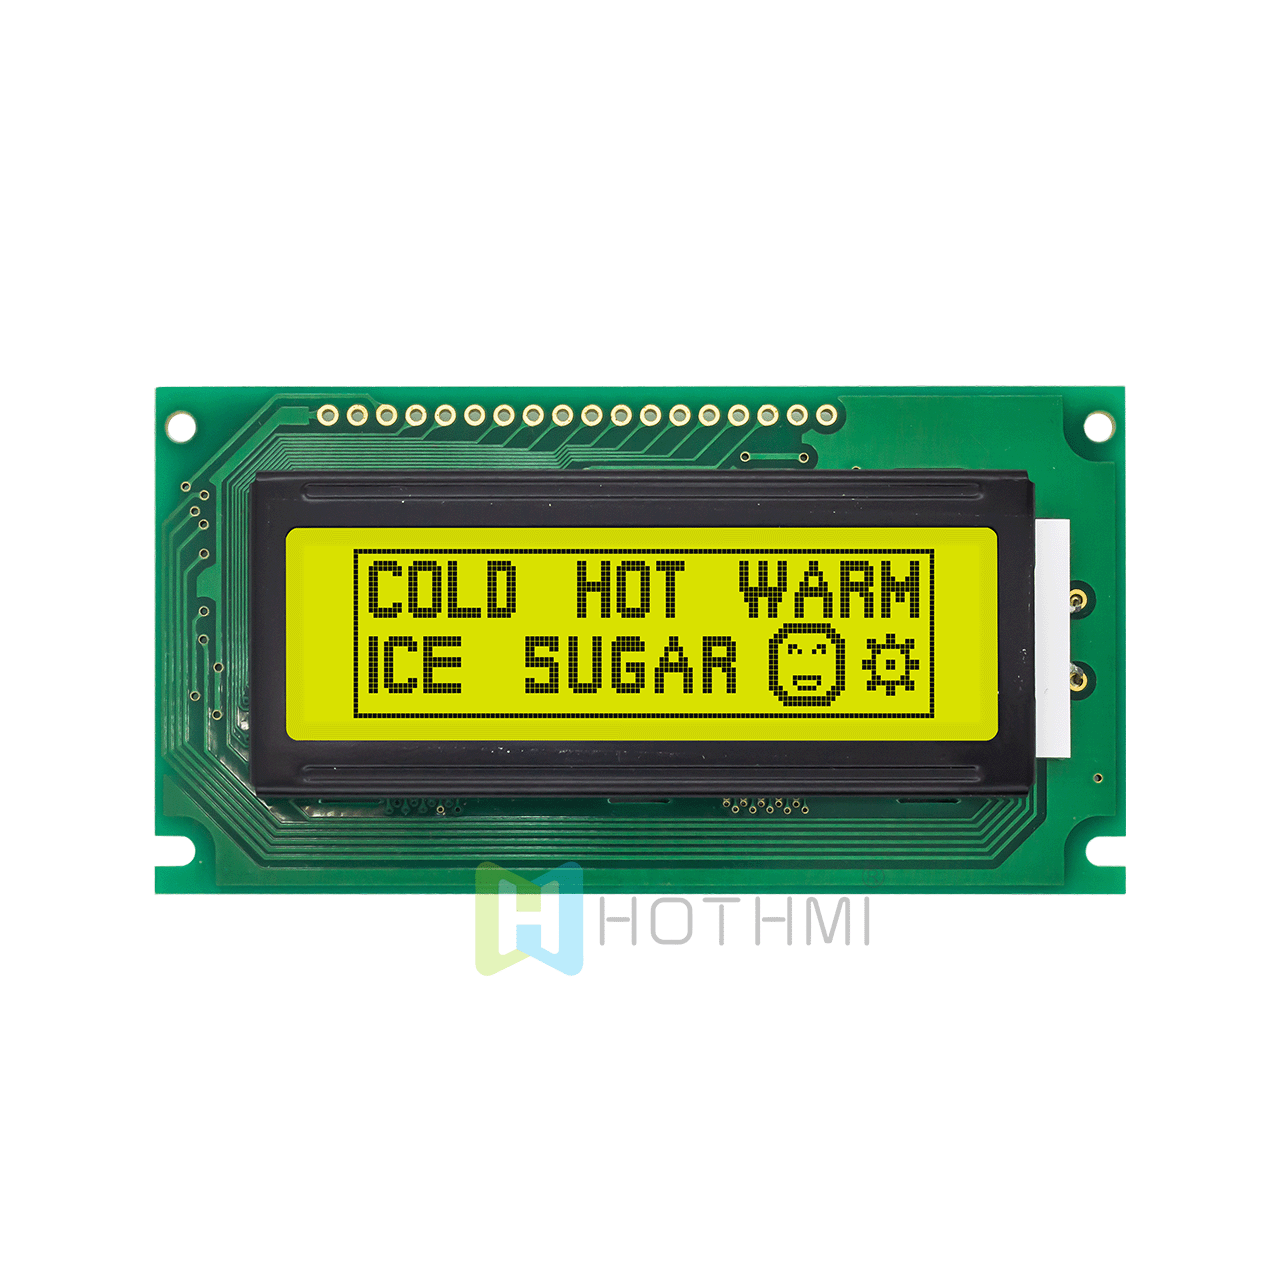 2.5"122X32 Graphic LCD | STN positive display with yellow-green side backlight | Adruino | Transflective display | ST7920 controller | 5.0V